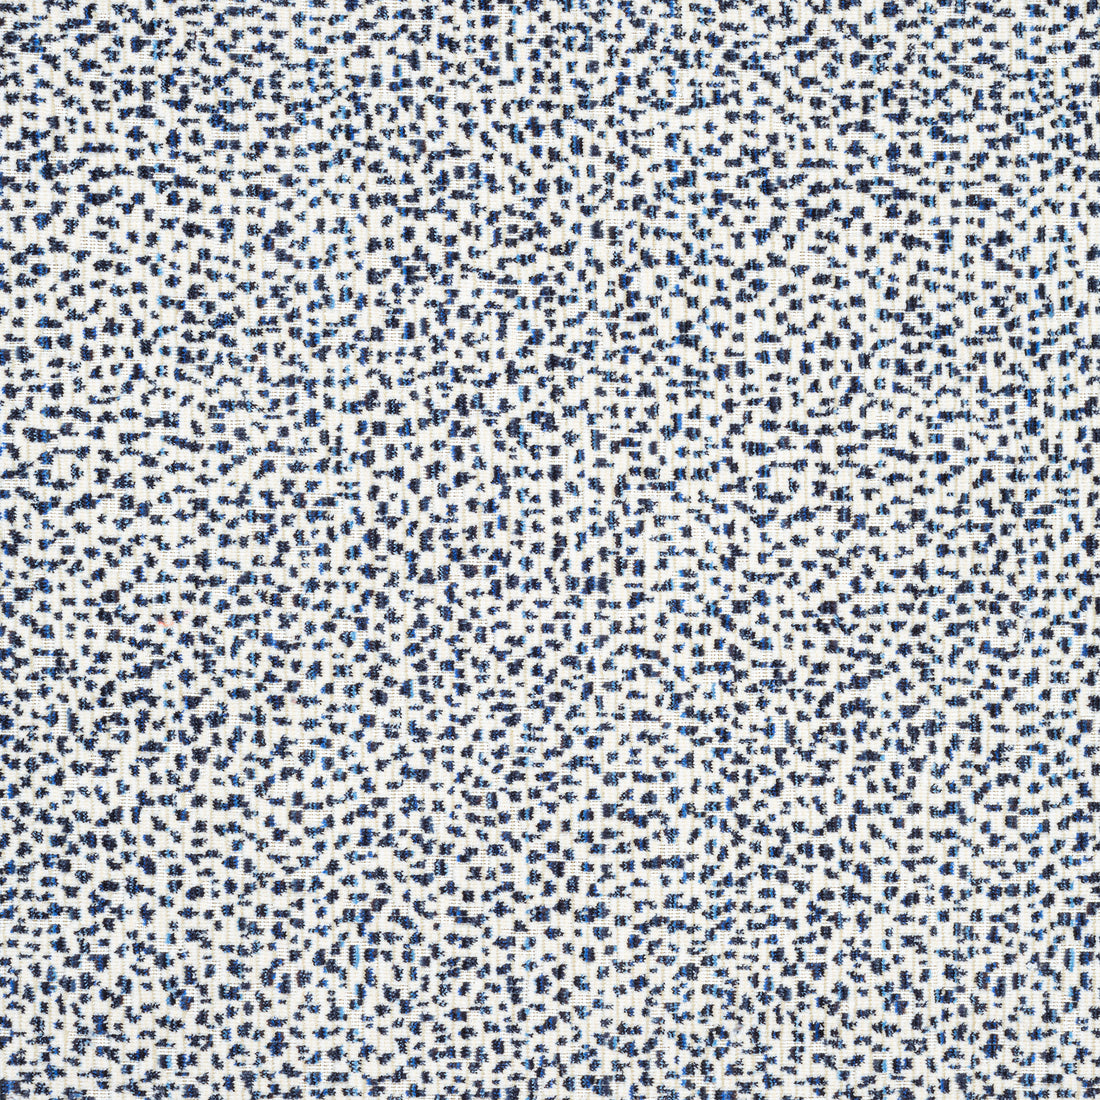 Swing Velvet fabric in navy color - pattern number W72803 - by Thibaut in the Woven Resource 13: Fusion Velvets collection